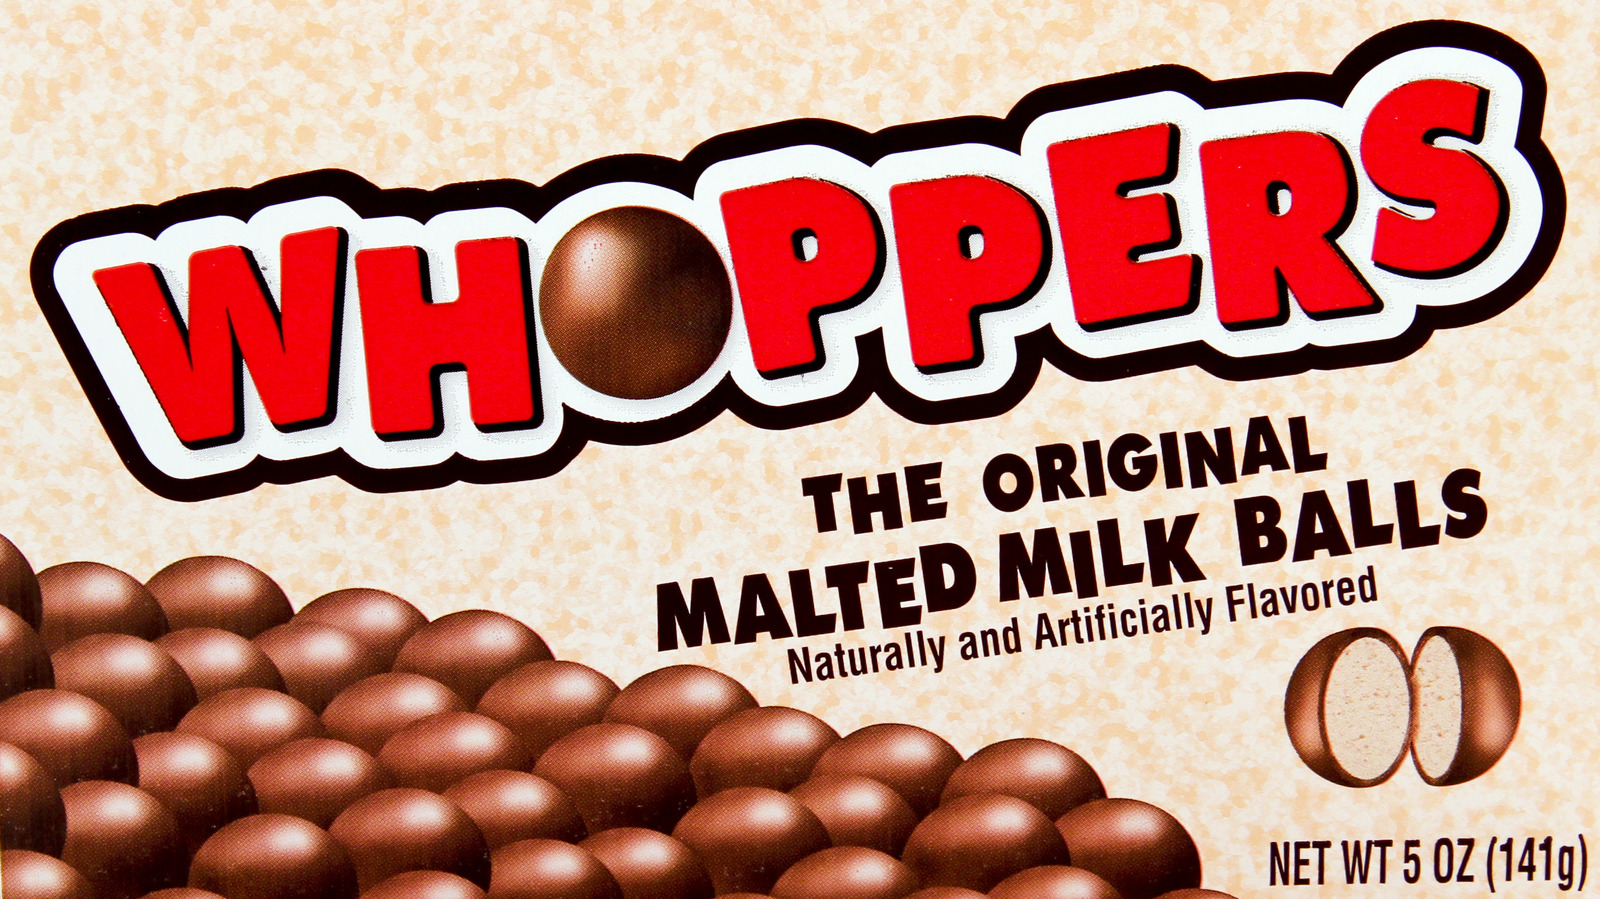 U.K.'s Favorite Maltesers Candy Now Available In The U.S. - Maltesers Now  Available In U.S. 